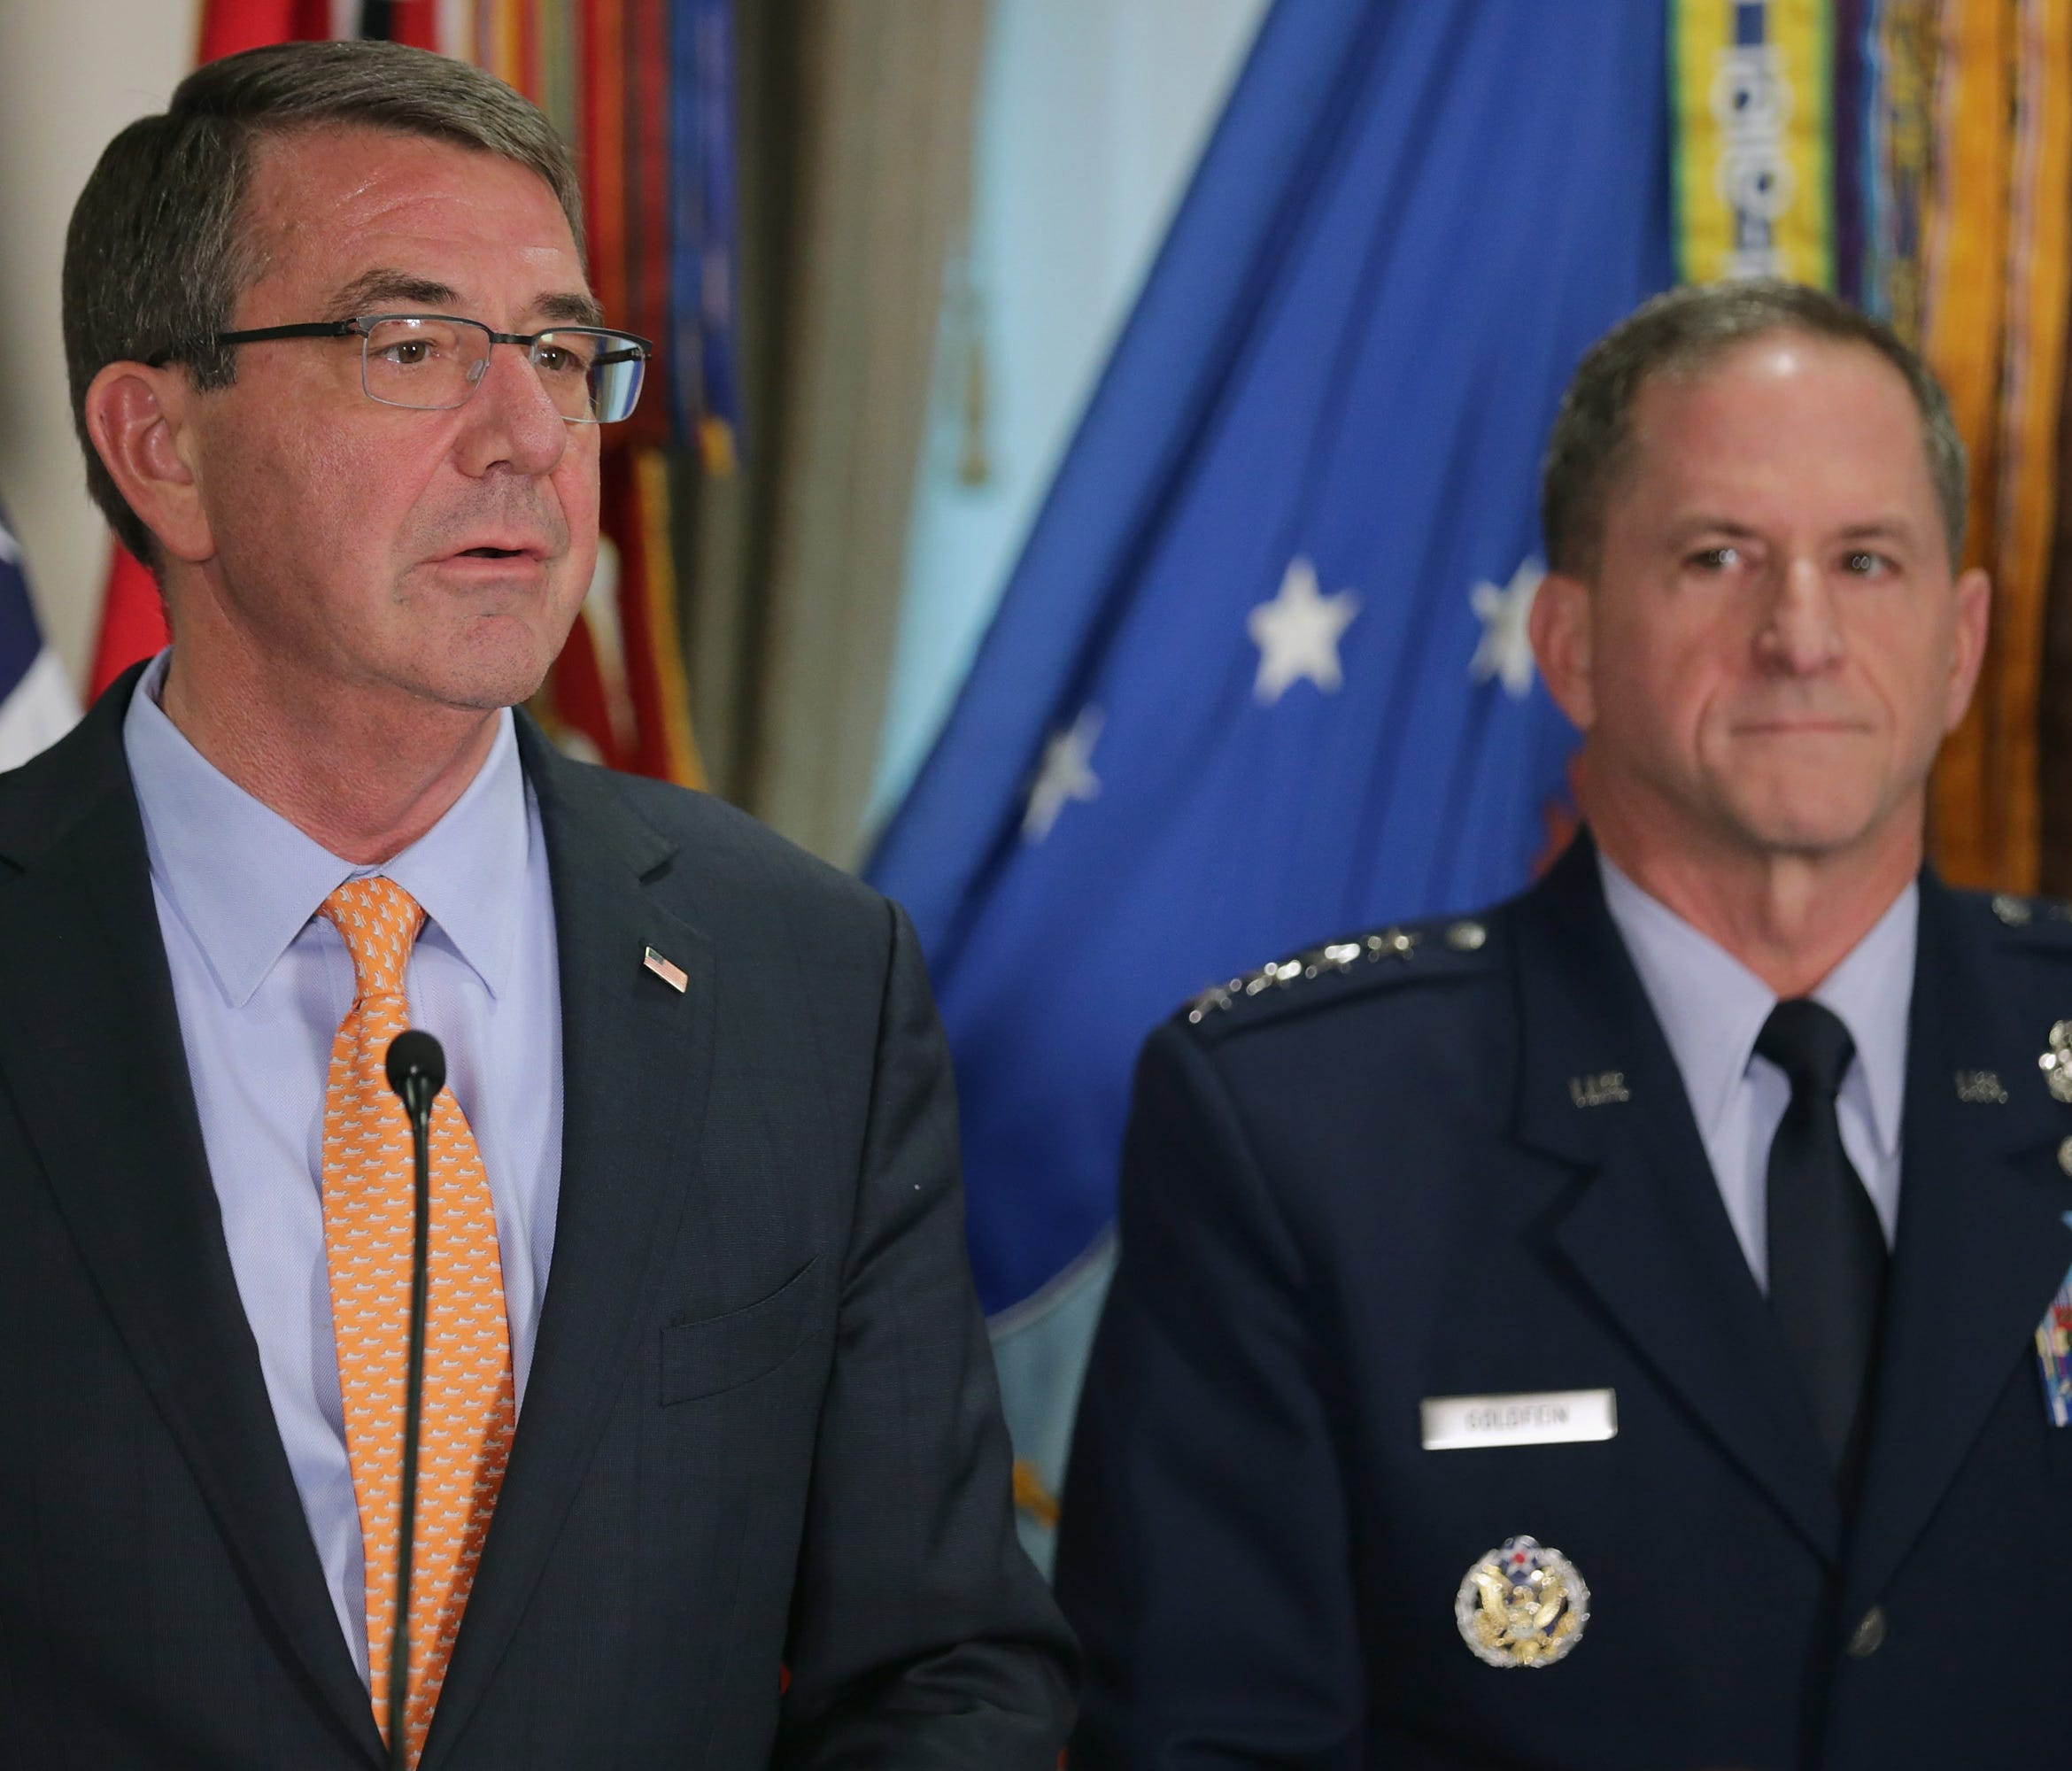 Gen. David Goldfein is introduced as the nominee for U.S. Air Force chief of staff by Defense Secretary Ash Carter at the Pentagon on April  29, 2016.